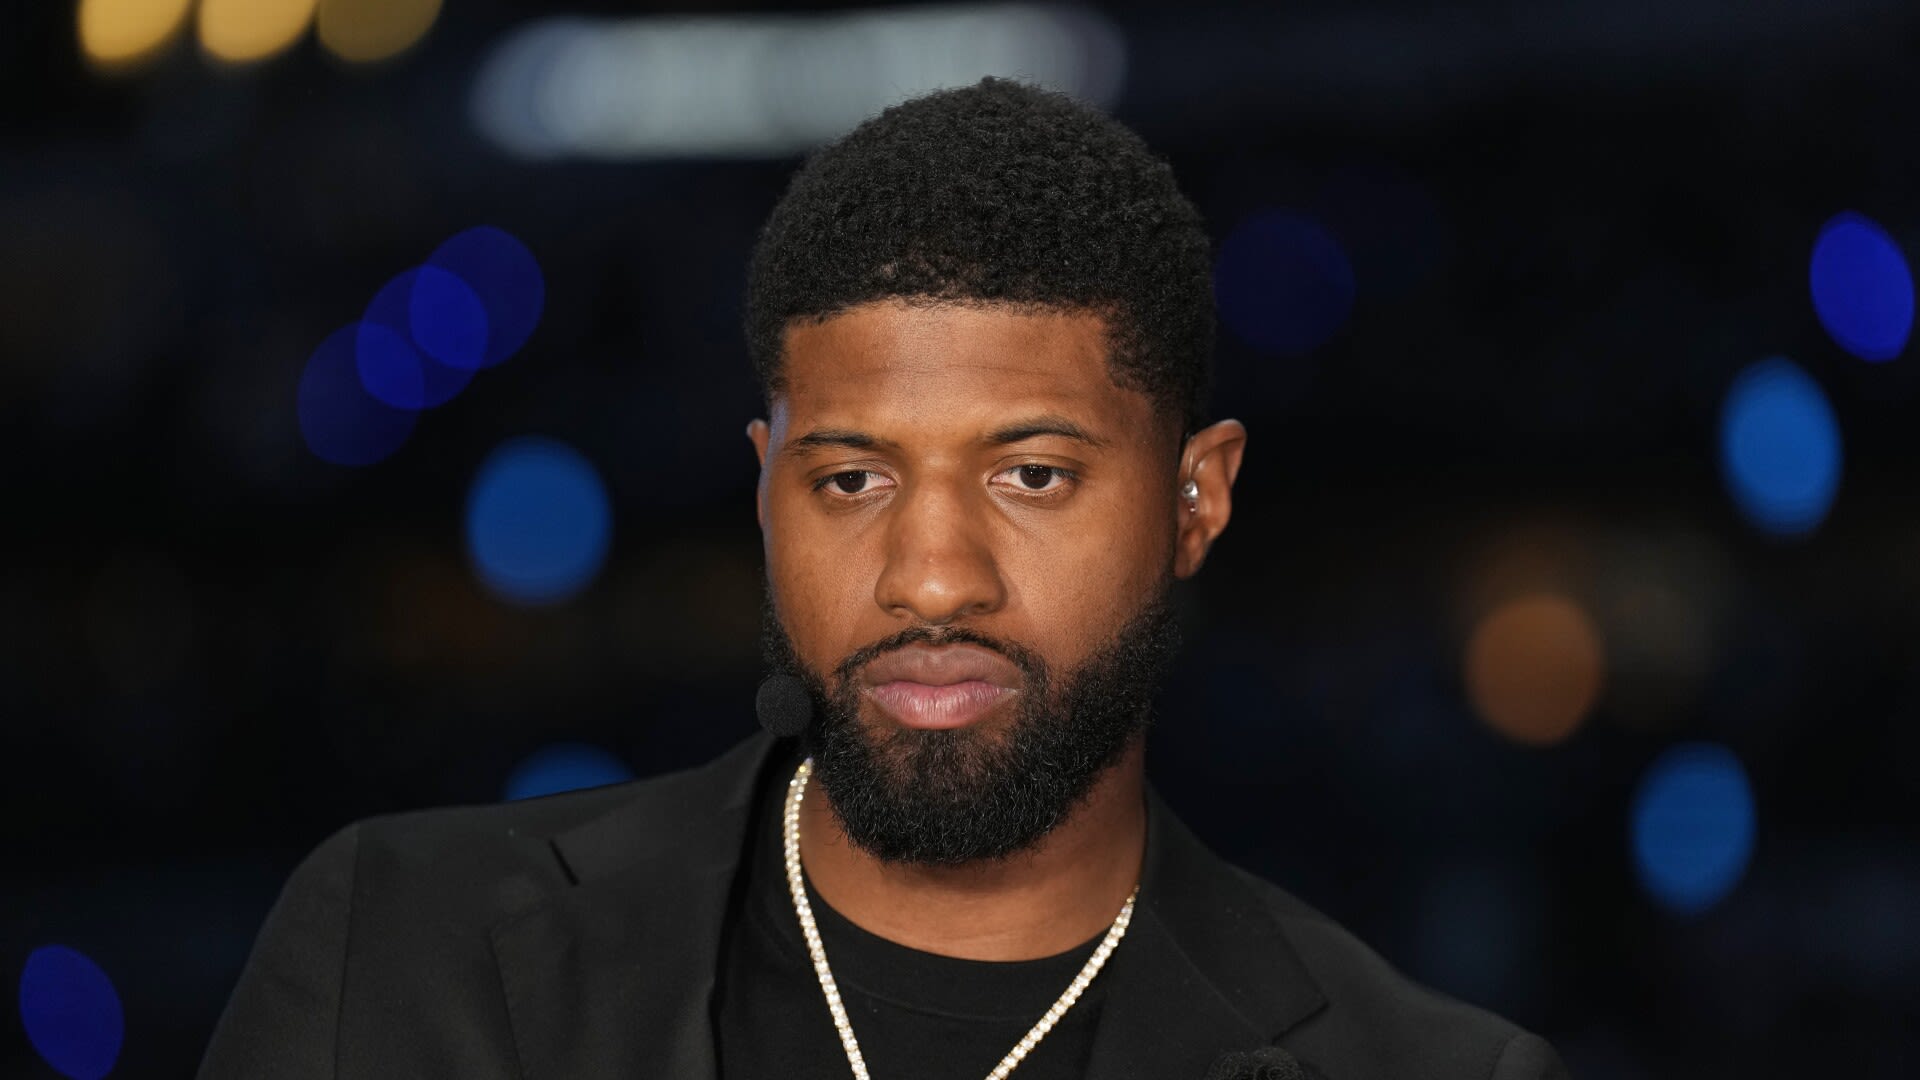 Paul George details frustrations, decision to leave Clippers for 76ers